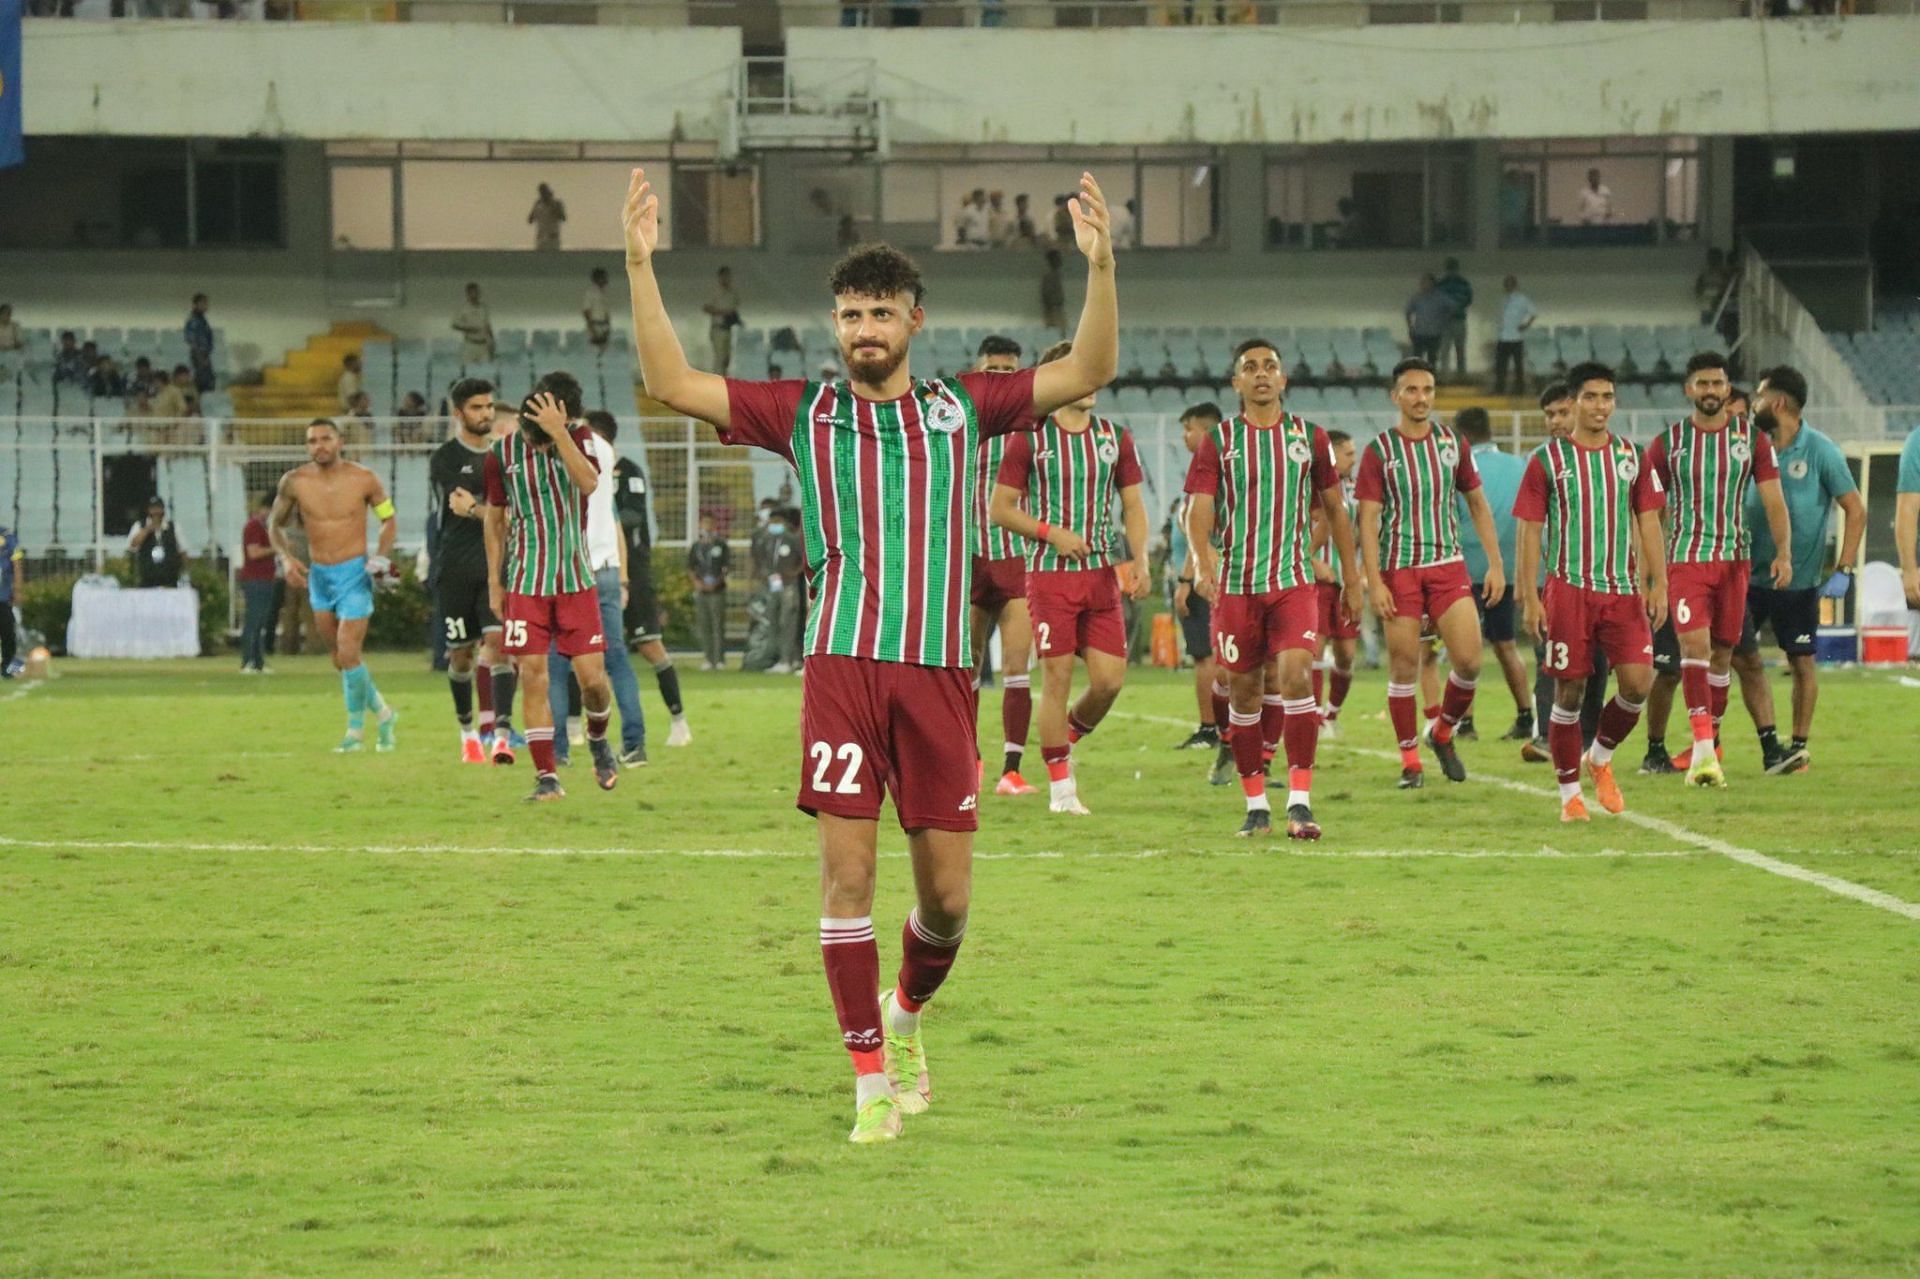 Mohun Bagan players receive the crowd&#039;s applause after the game (Image: Mohun Bagan on Twitter)